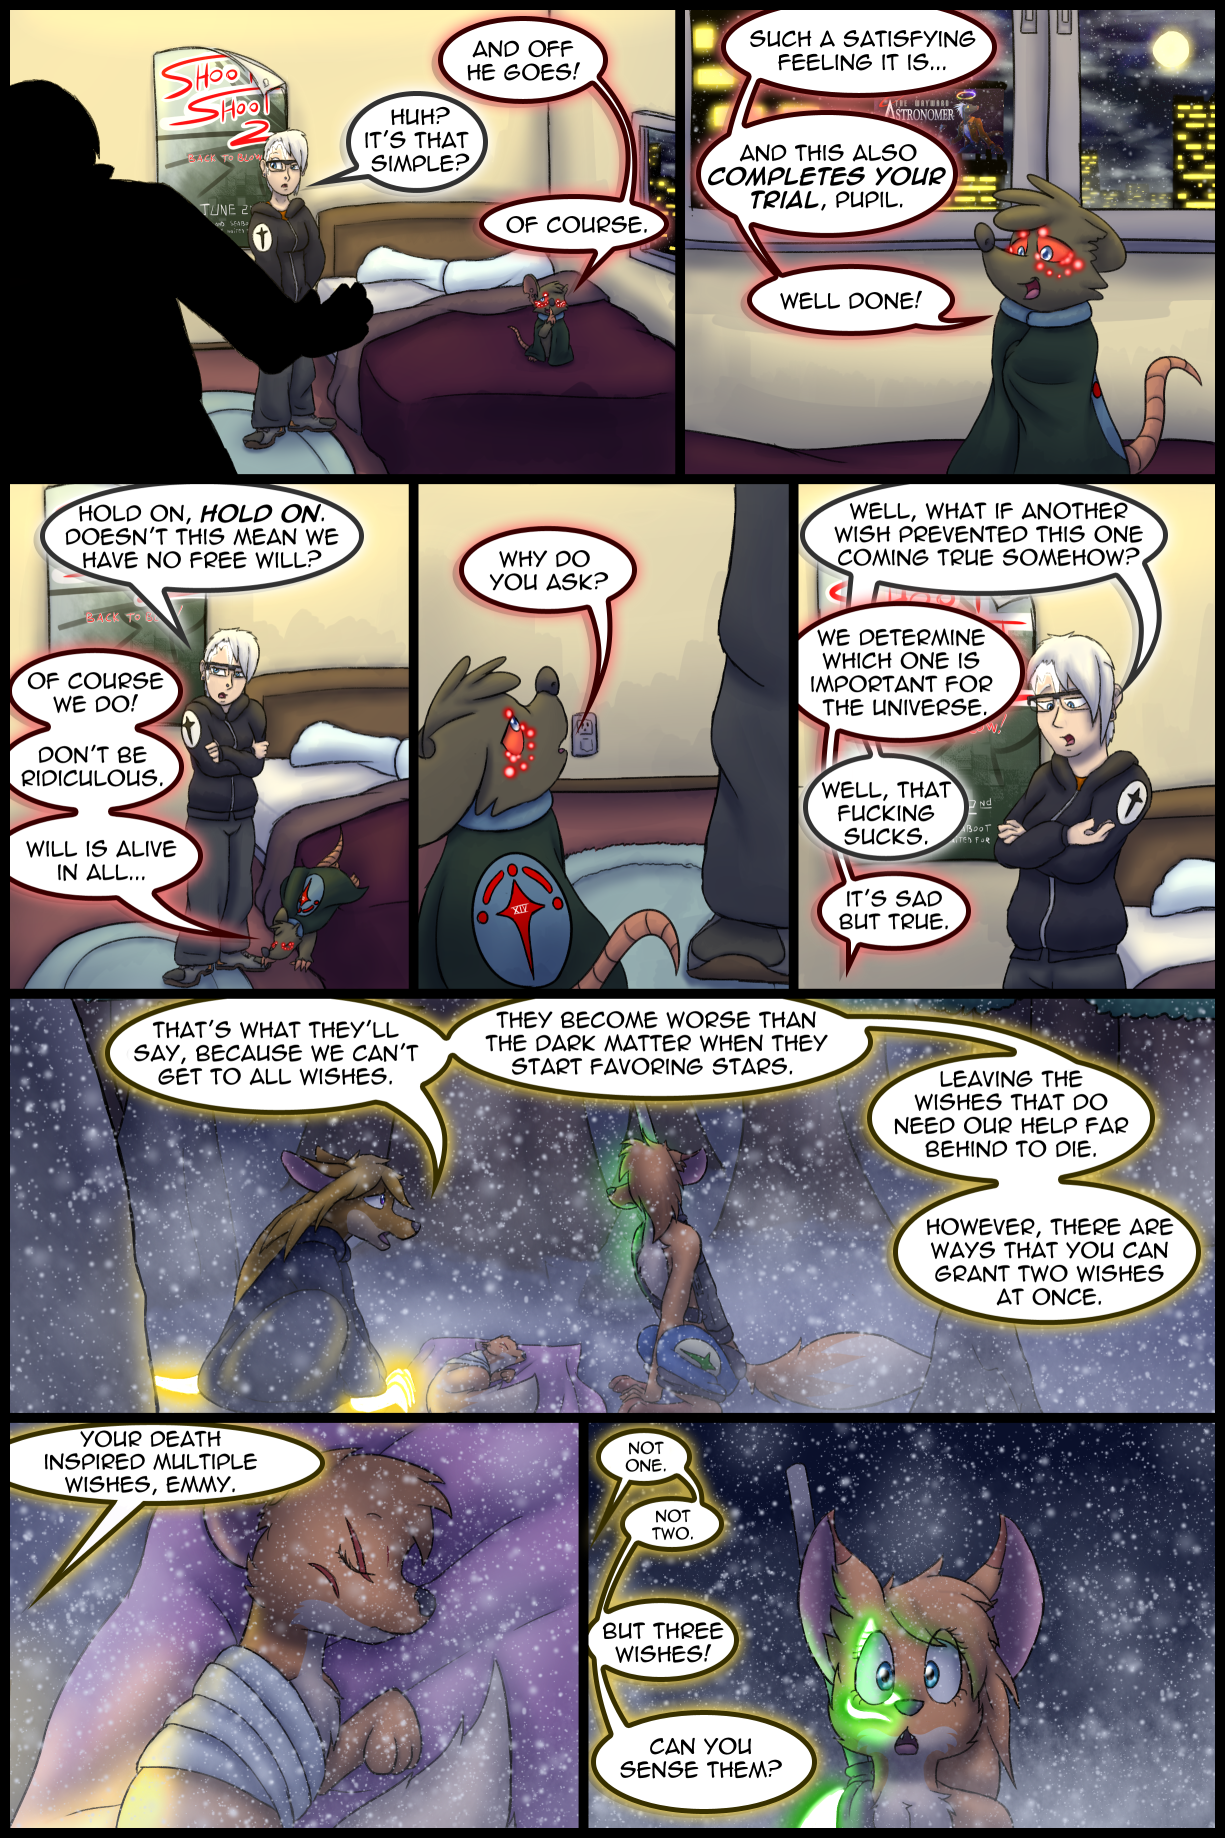 Ch3 Page 8 – More than One